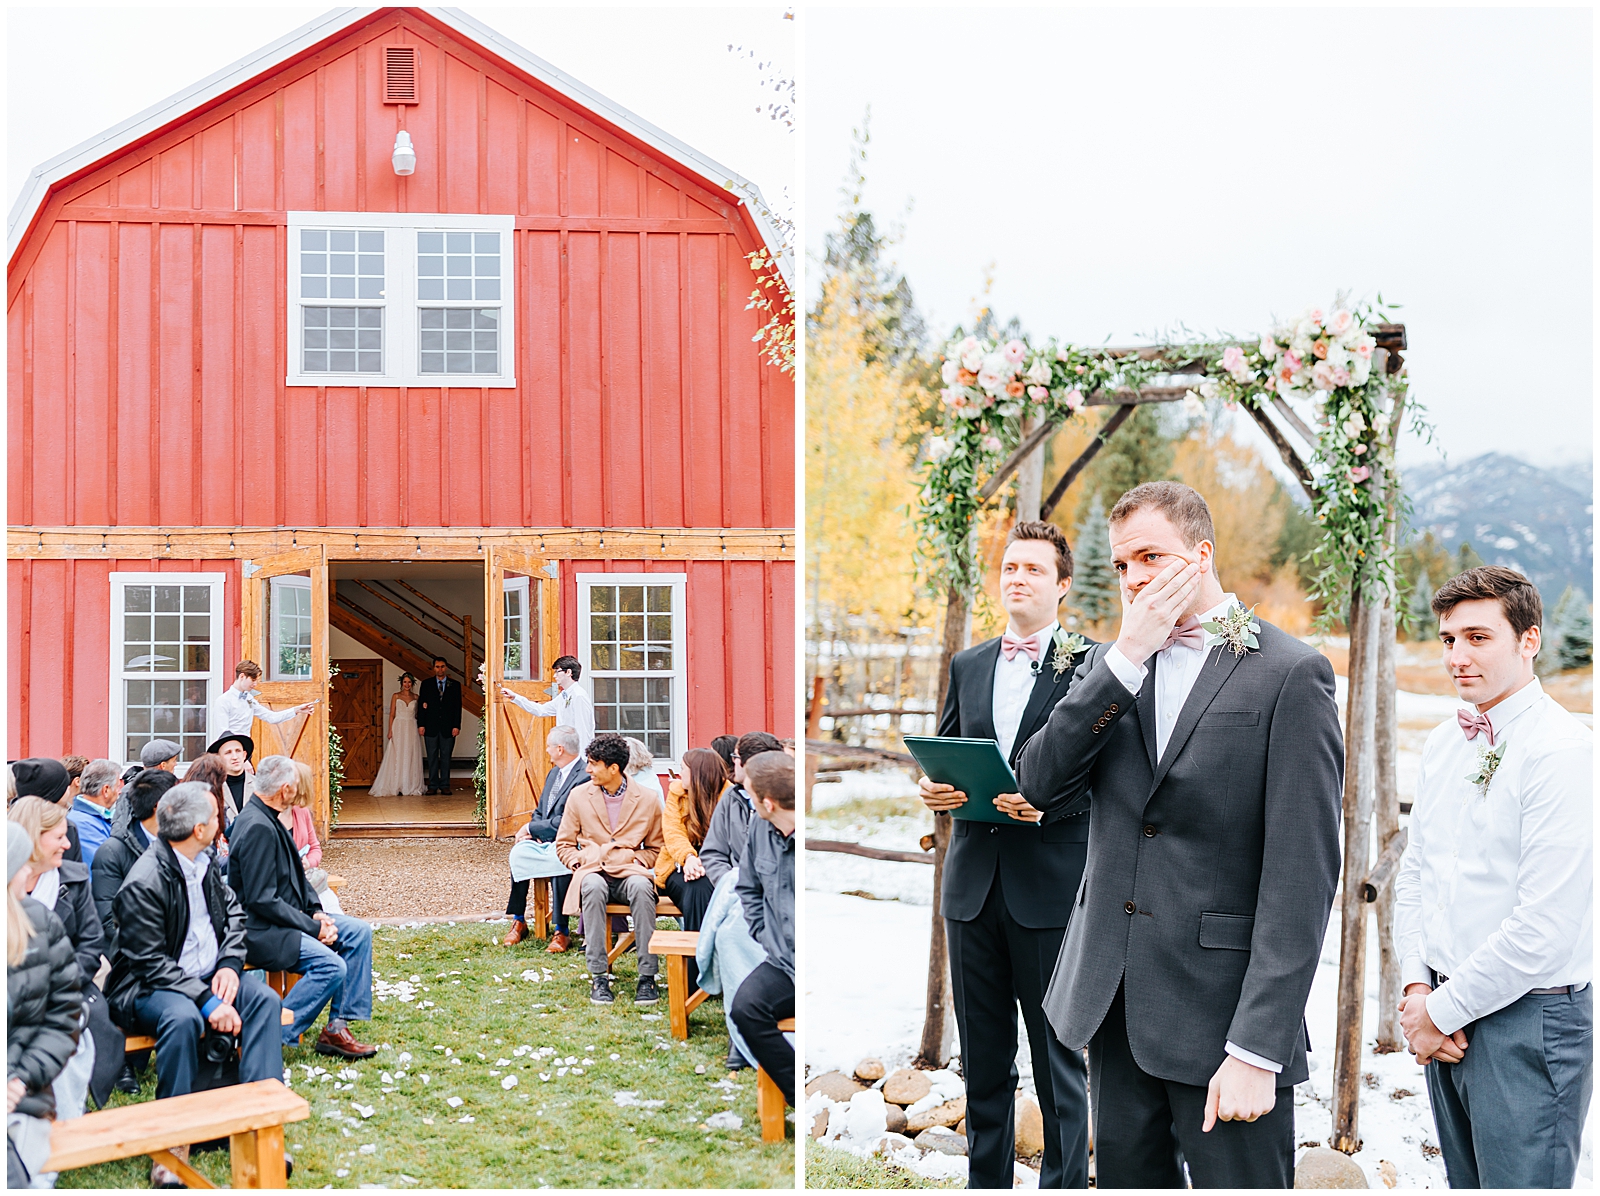 Groom's Reaction at Ceremony - Red Barn Wedding at Sixty Chapel